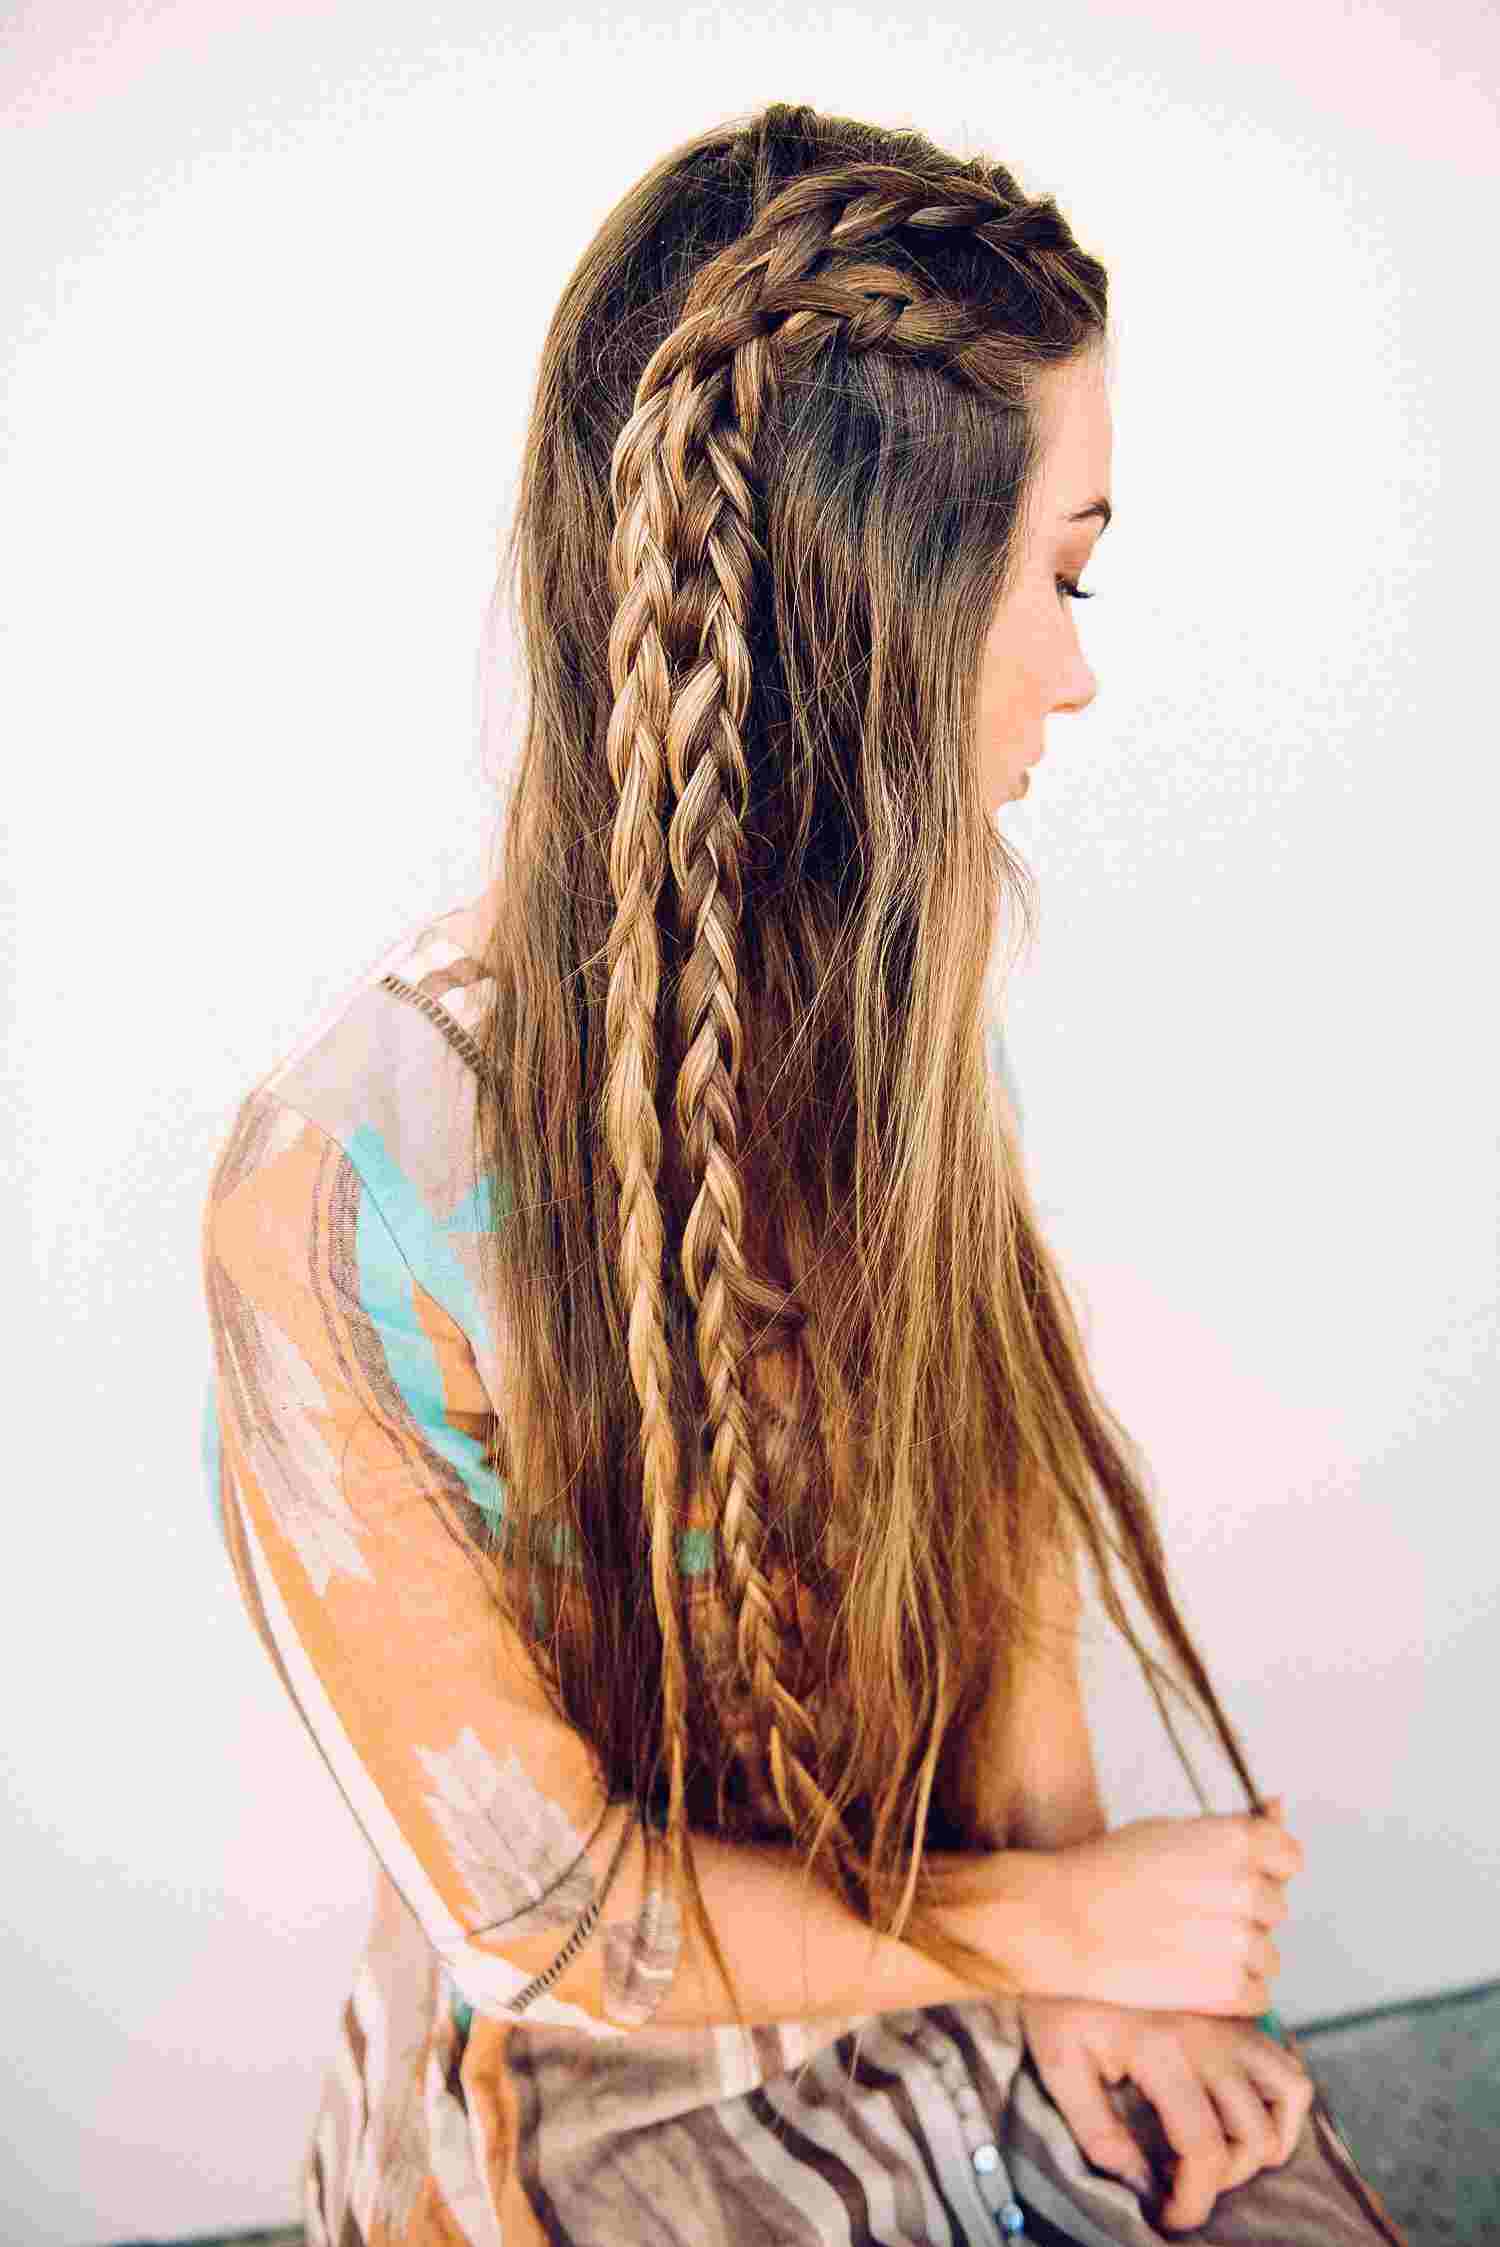 Hairstyle Hairstyles You can easily find boho look hairstyle ideas guide